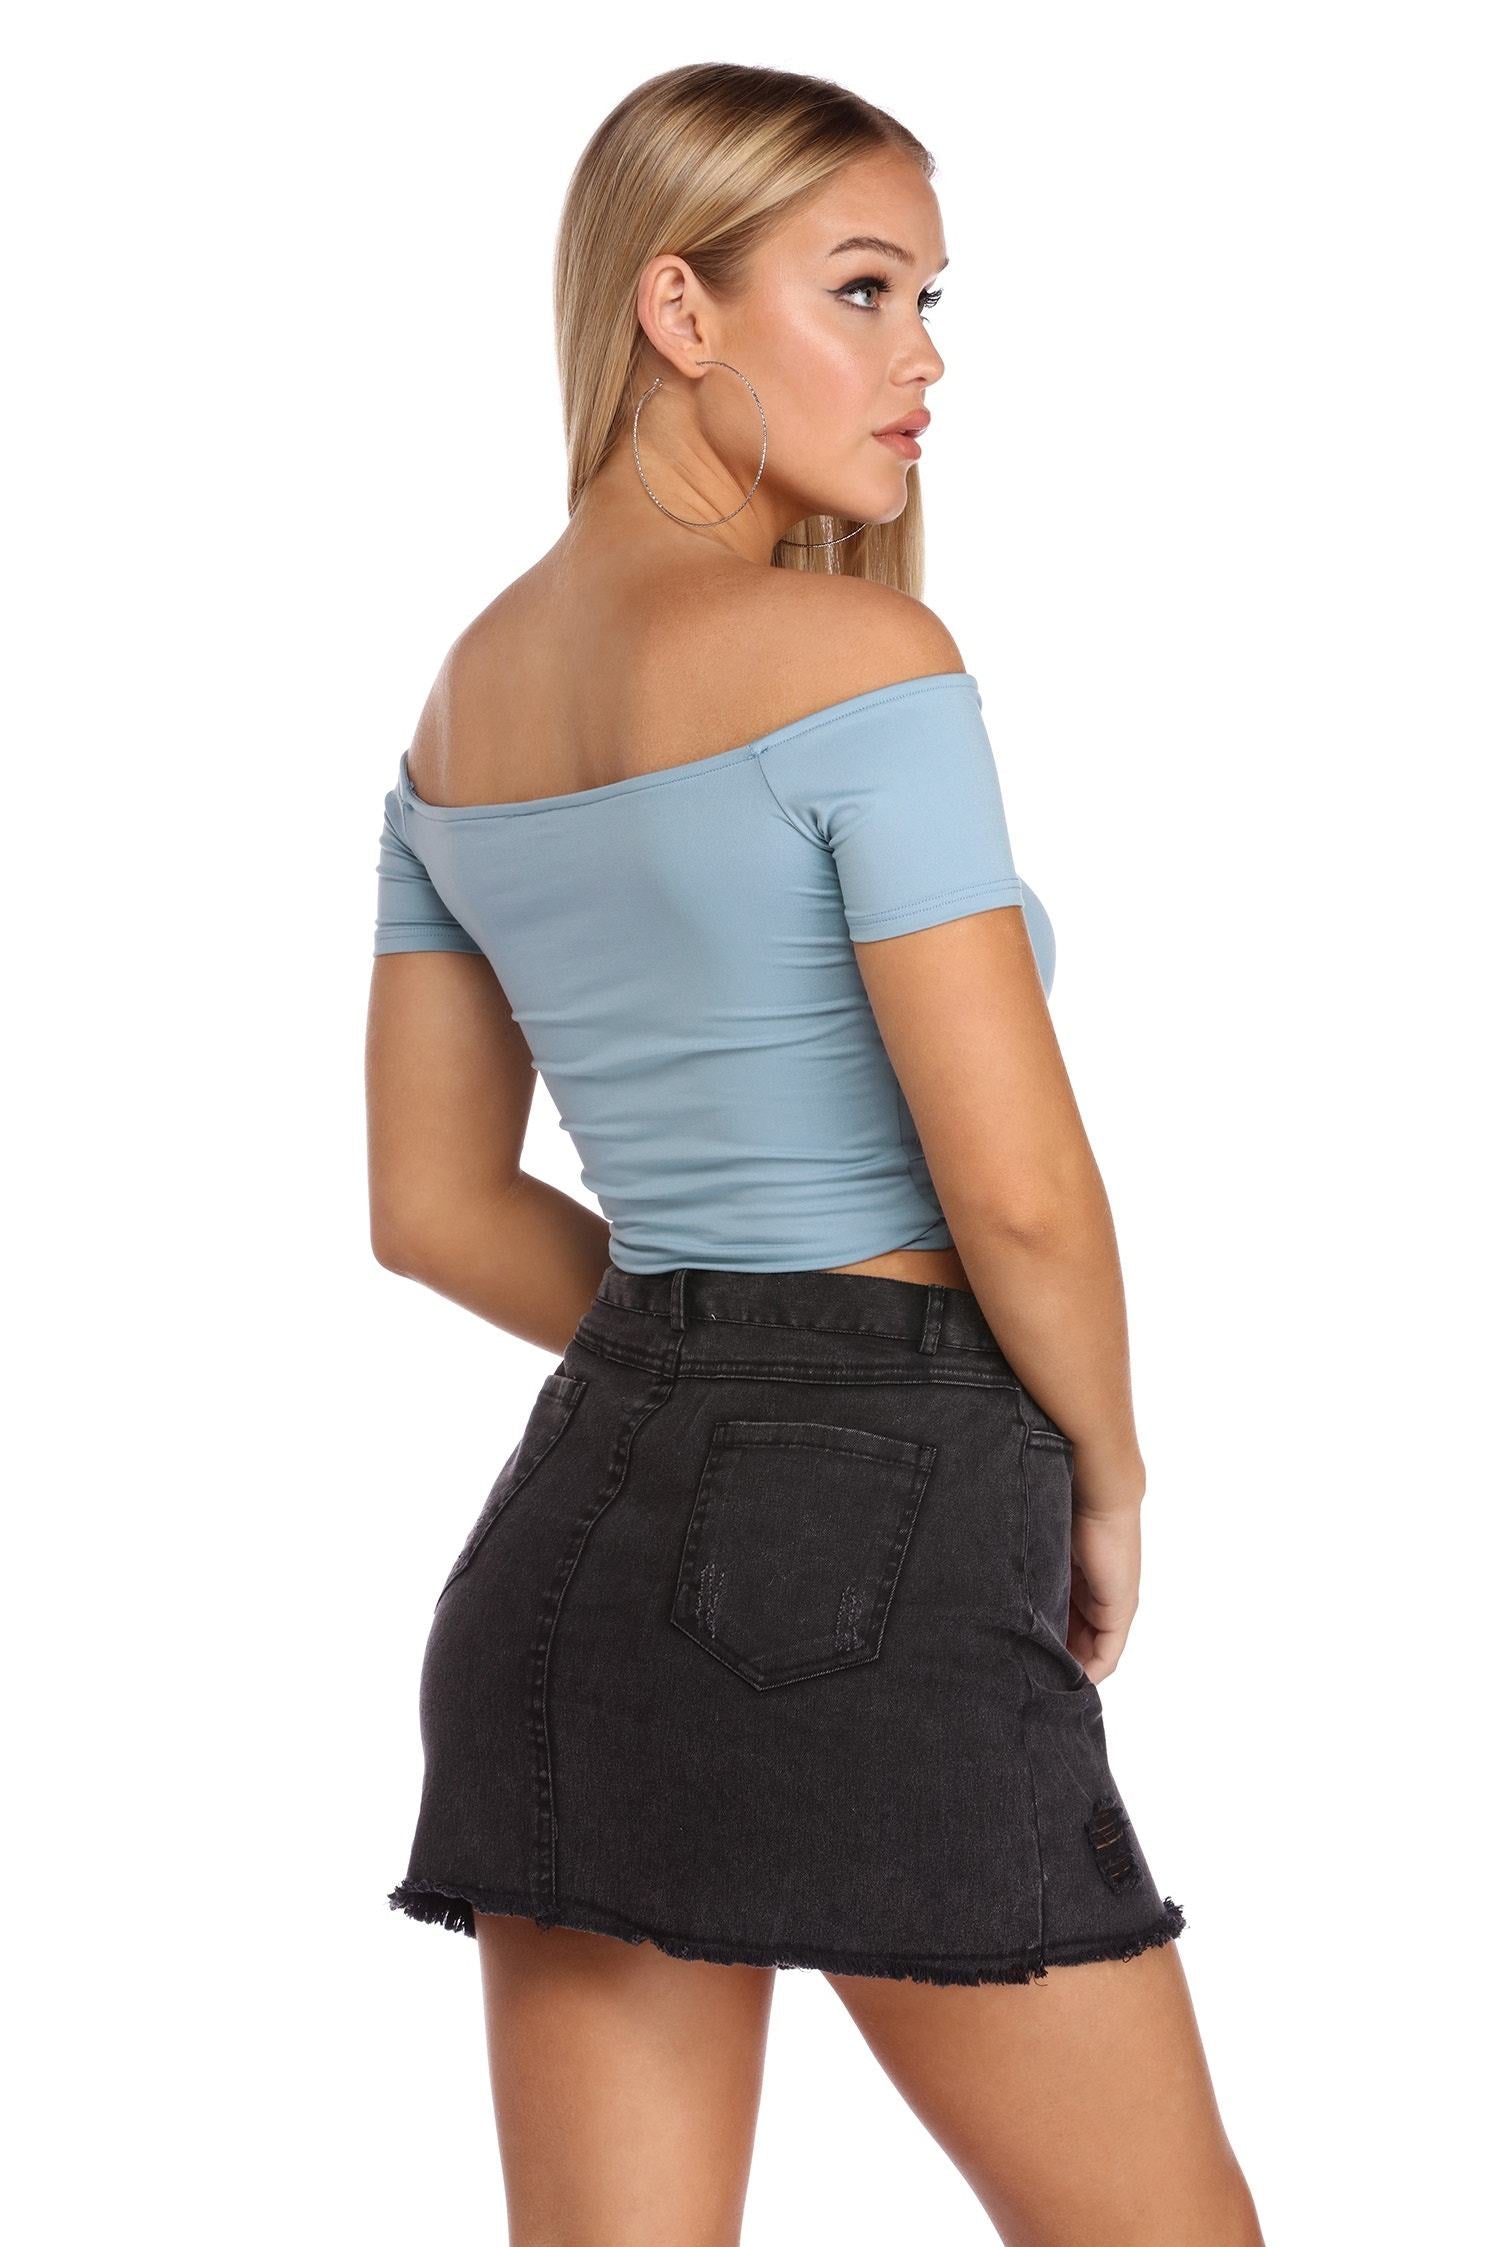 Knot Over You Off Shoulder Crop Top - Lady Occasions